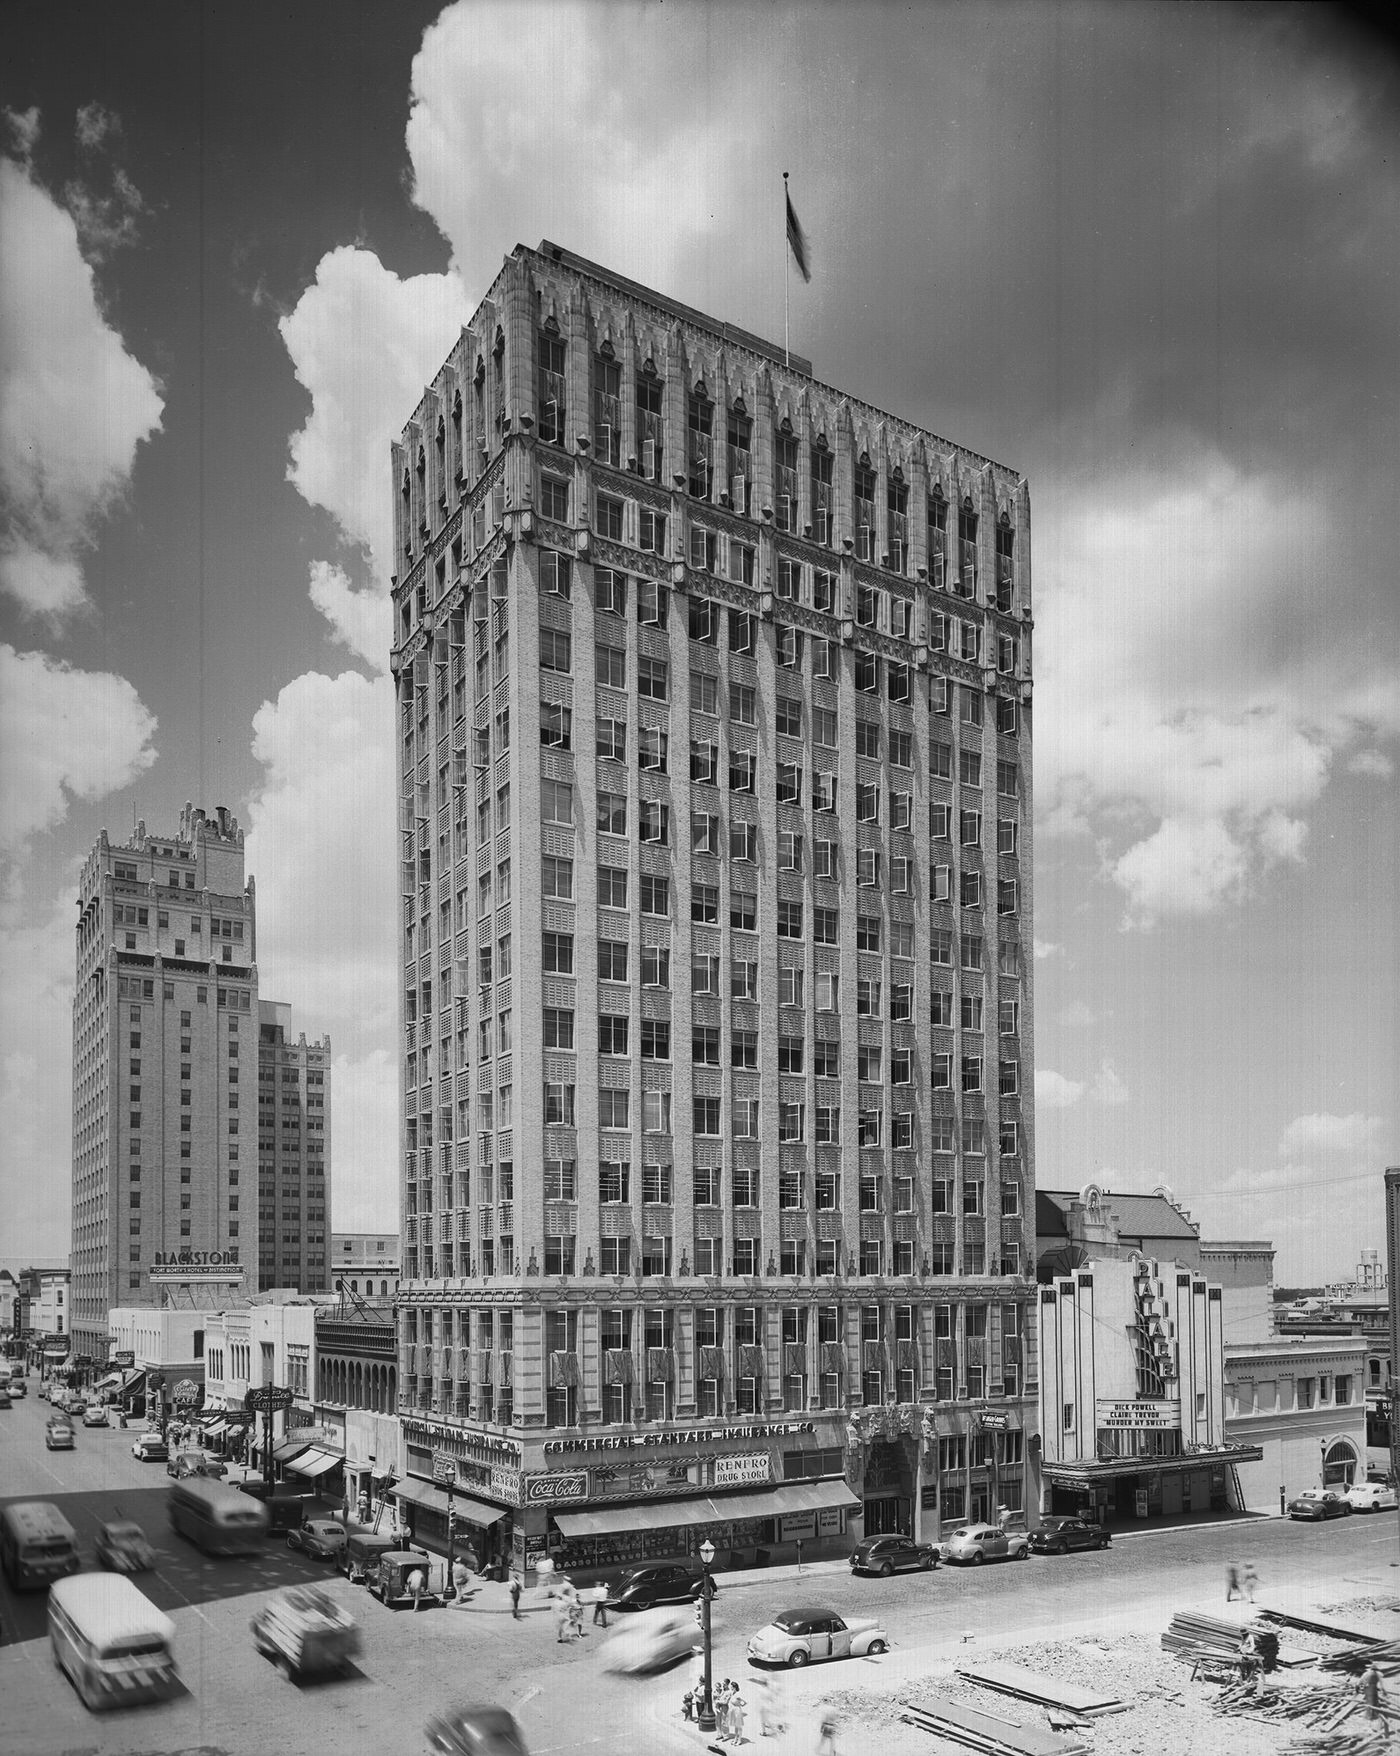 Aviation building at 7th and Main, downtown Fort Worth - Commercial Standard Insurance Company, Blackstone Hotel on Main St., Palace Theater on 7th St., Ellison Furniture in background on right, 1945